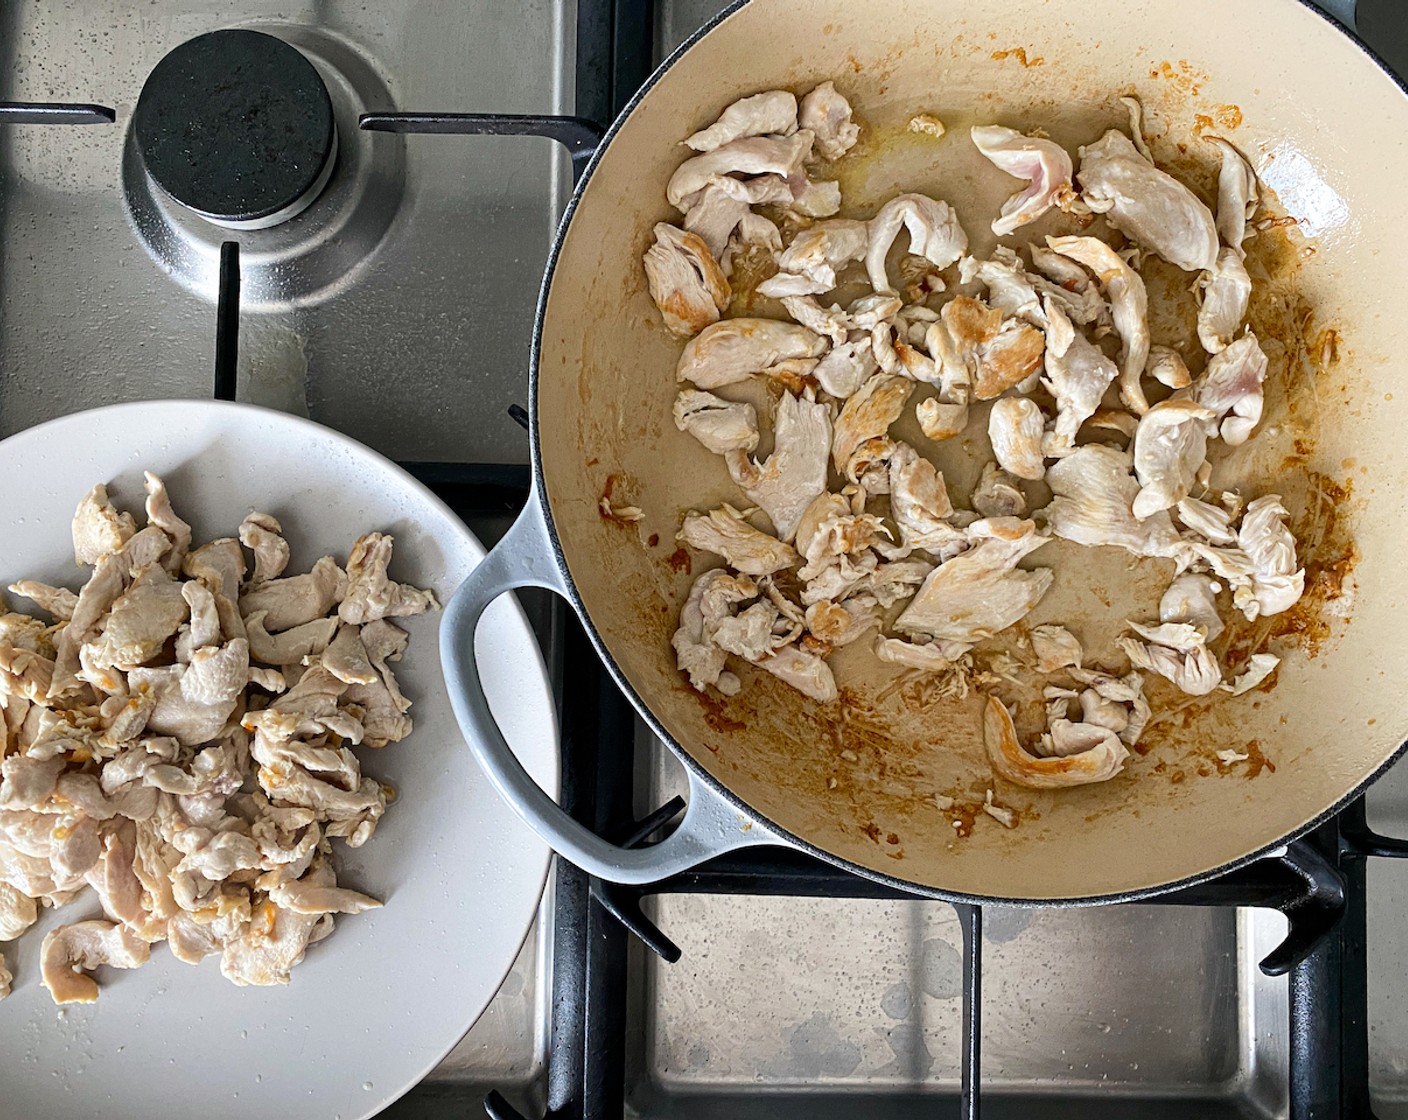 step 3 Heat the Olive Oil (2 Tbsp) and lightly brown the sliced chicken in batches. Remove browned chicken from the pan and set aside.